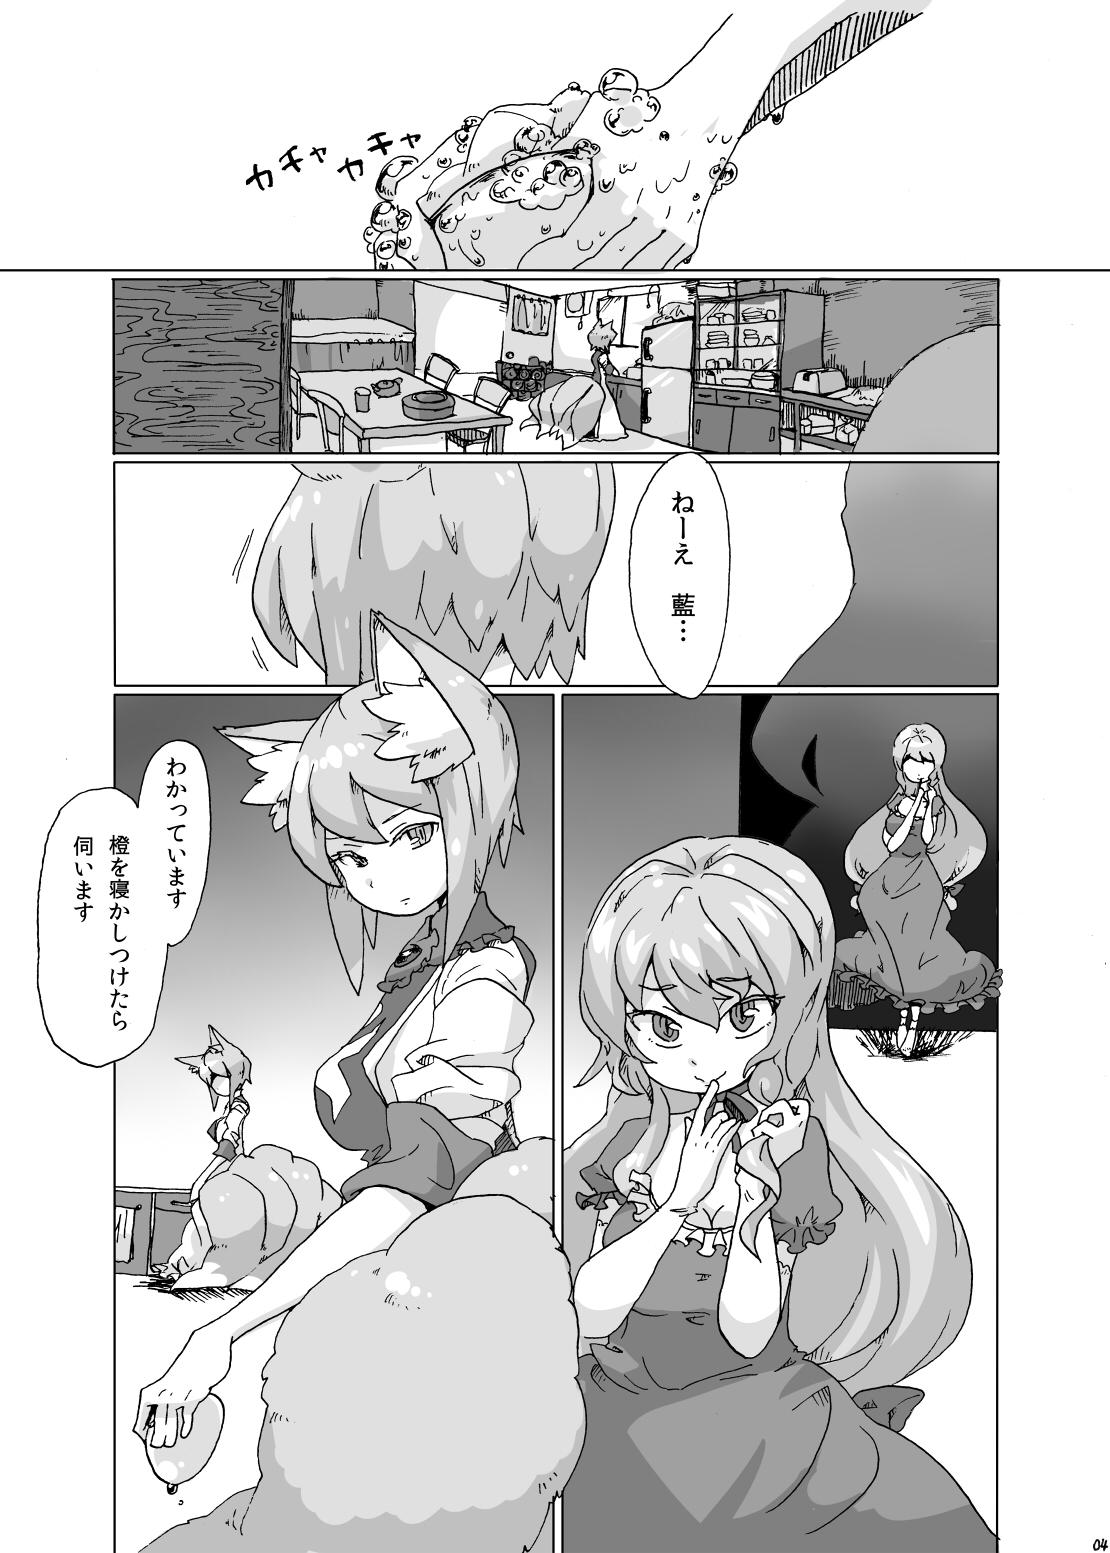 Shoes 紫さまとわたし - Touhou project Fucking Hard - Page 3